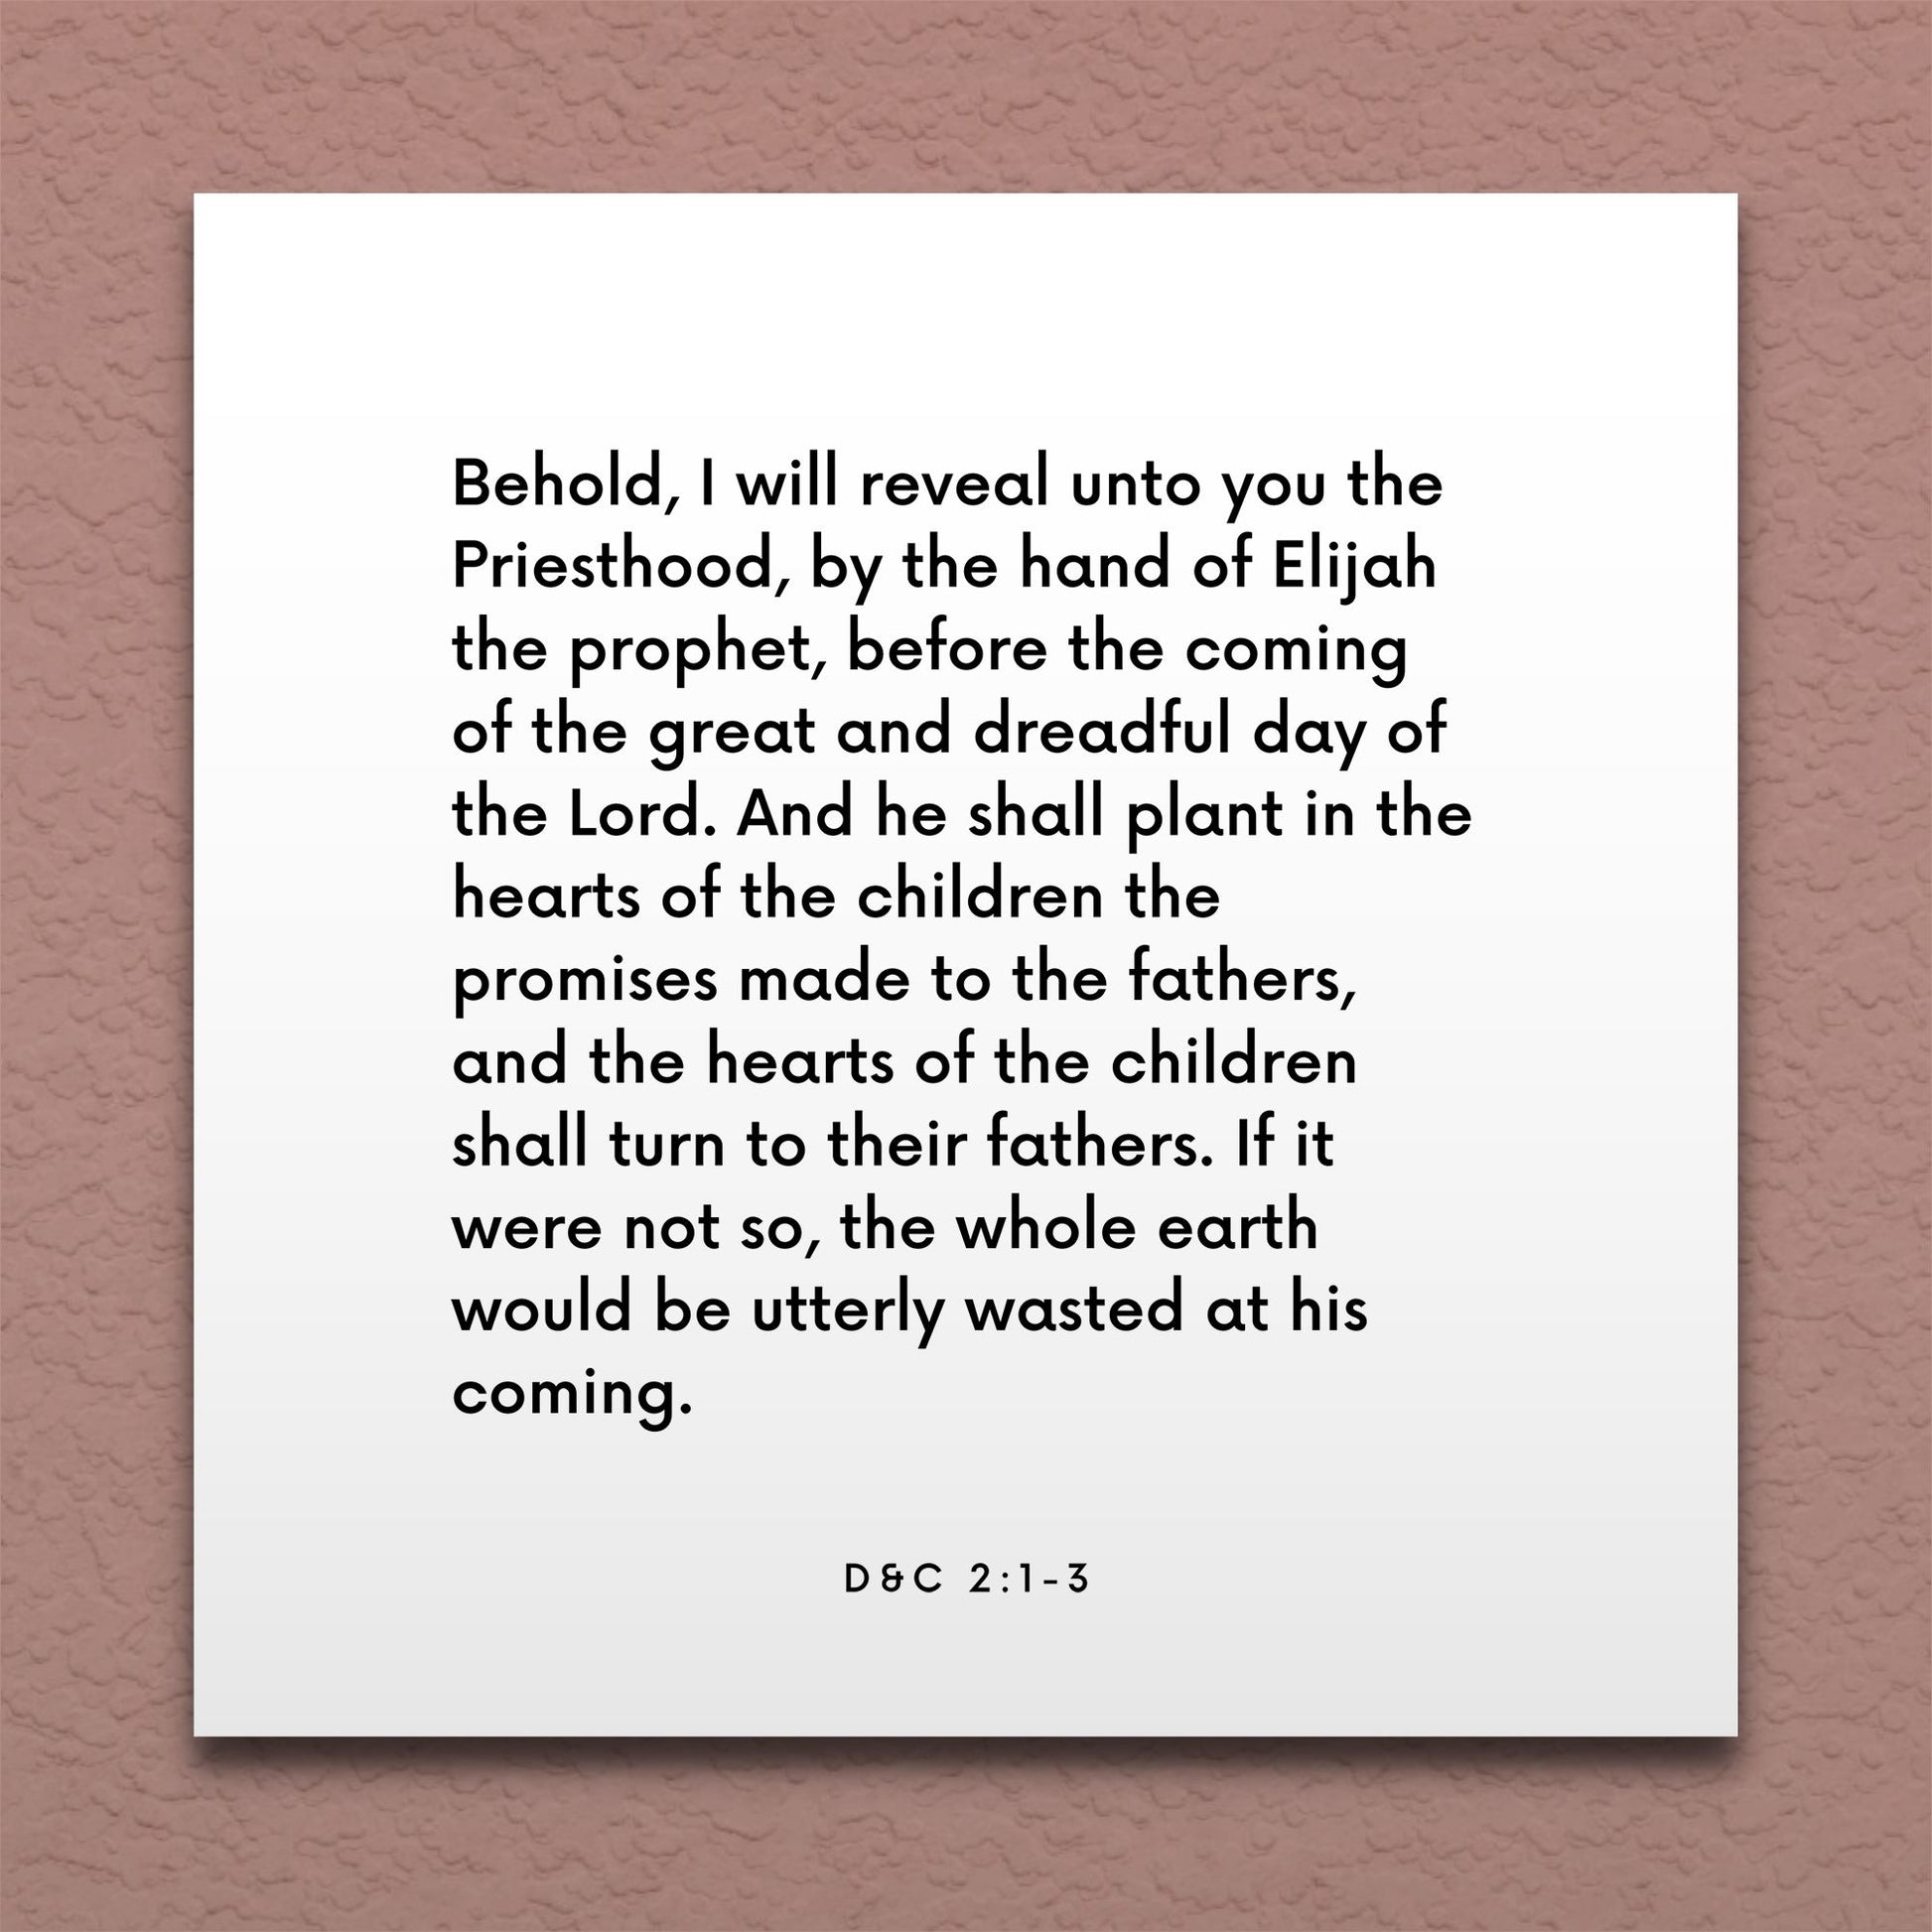 Wall-mounted scripture tile for D&C 2:1-3 - "The hearts of the children shall turn to their fathers"